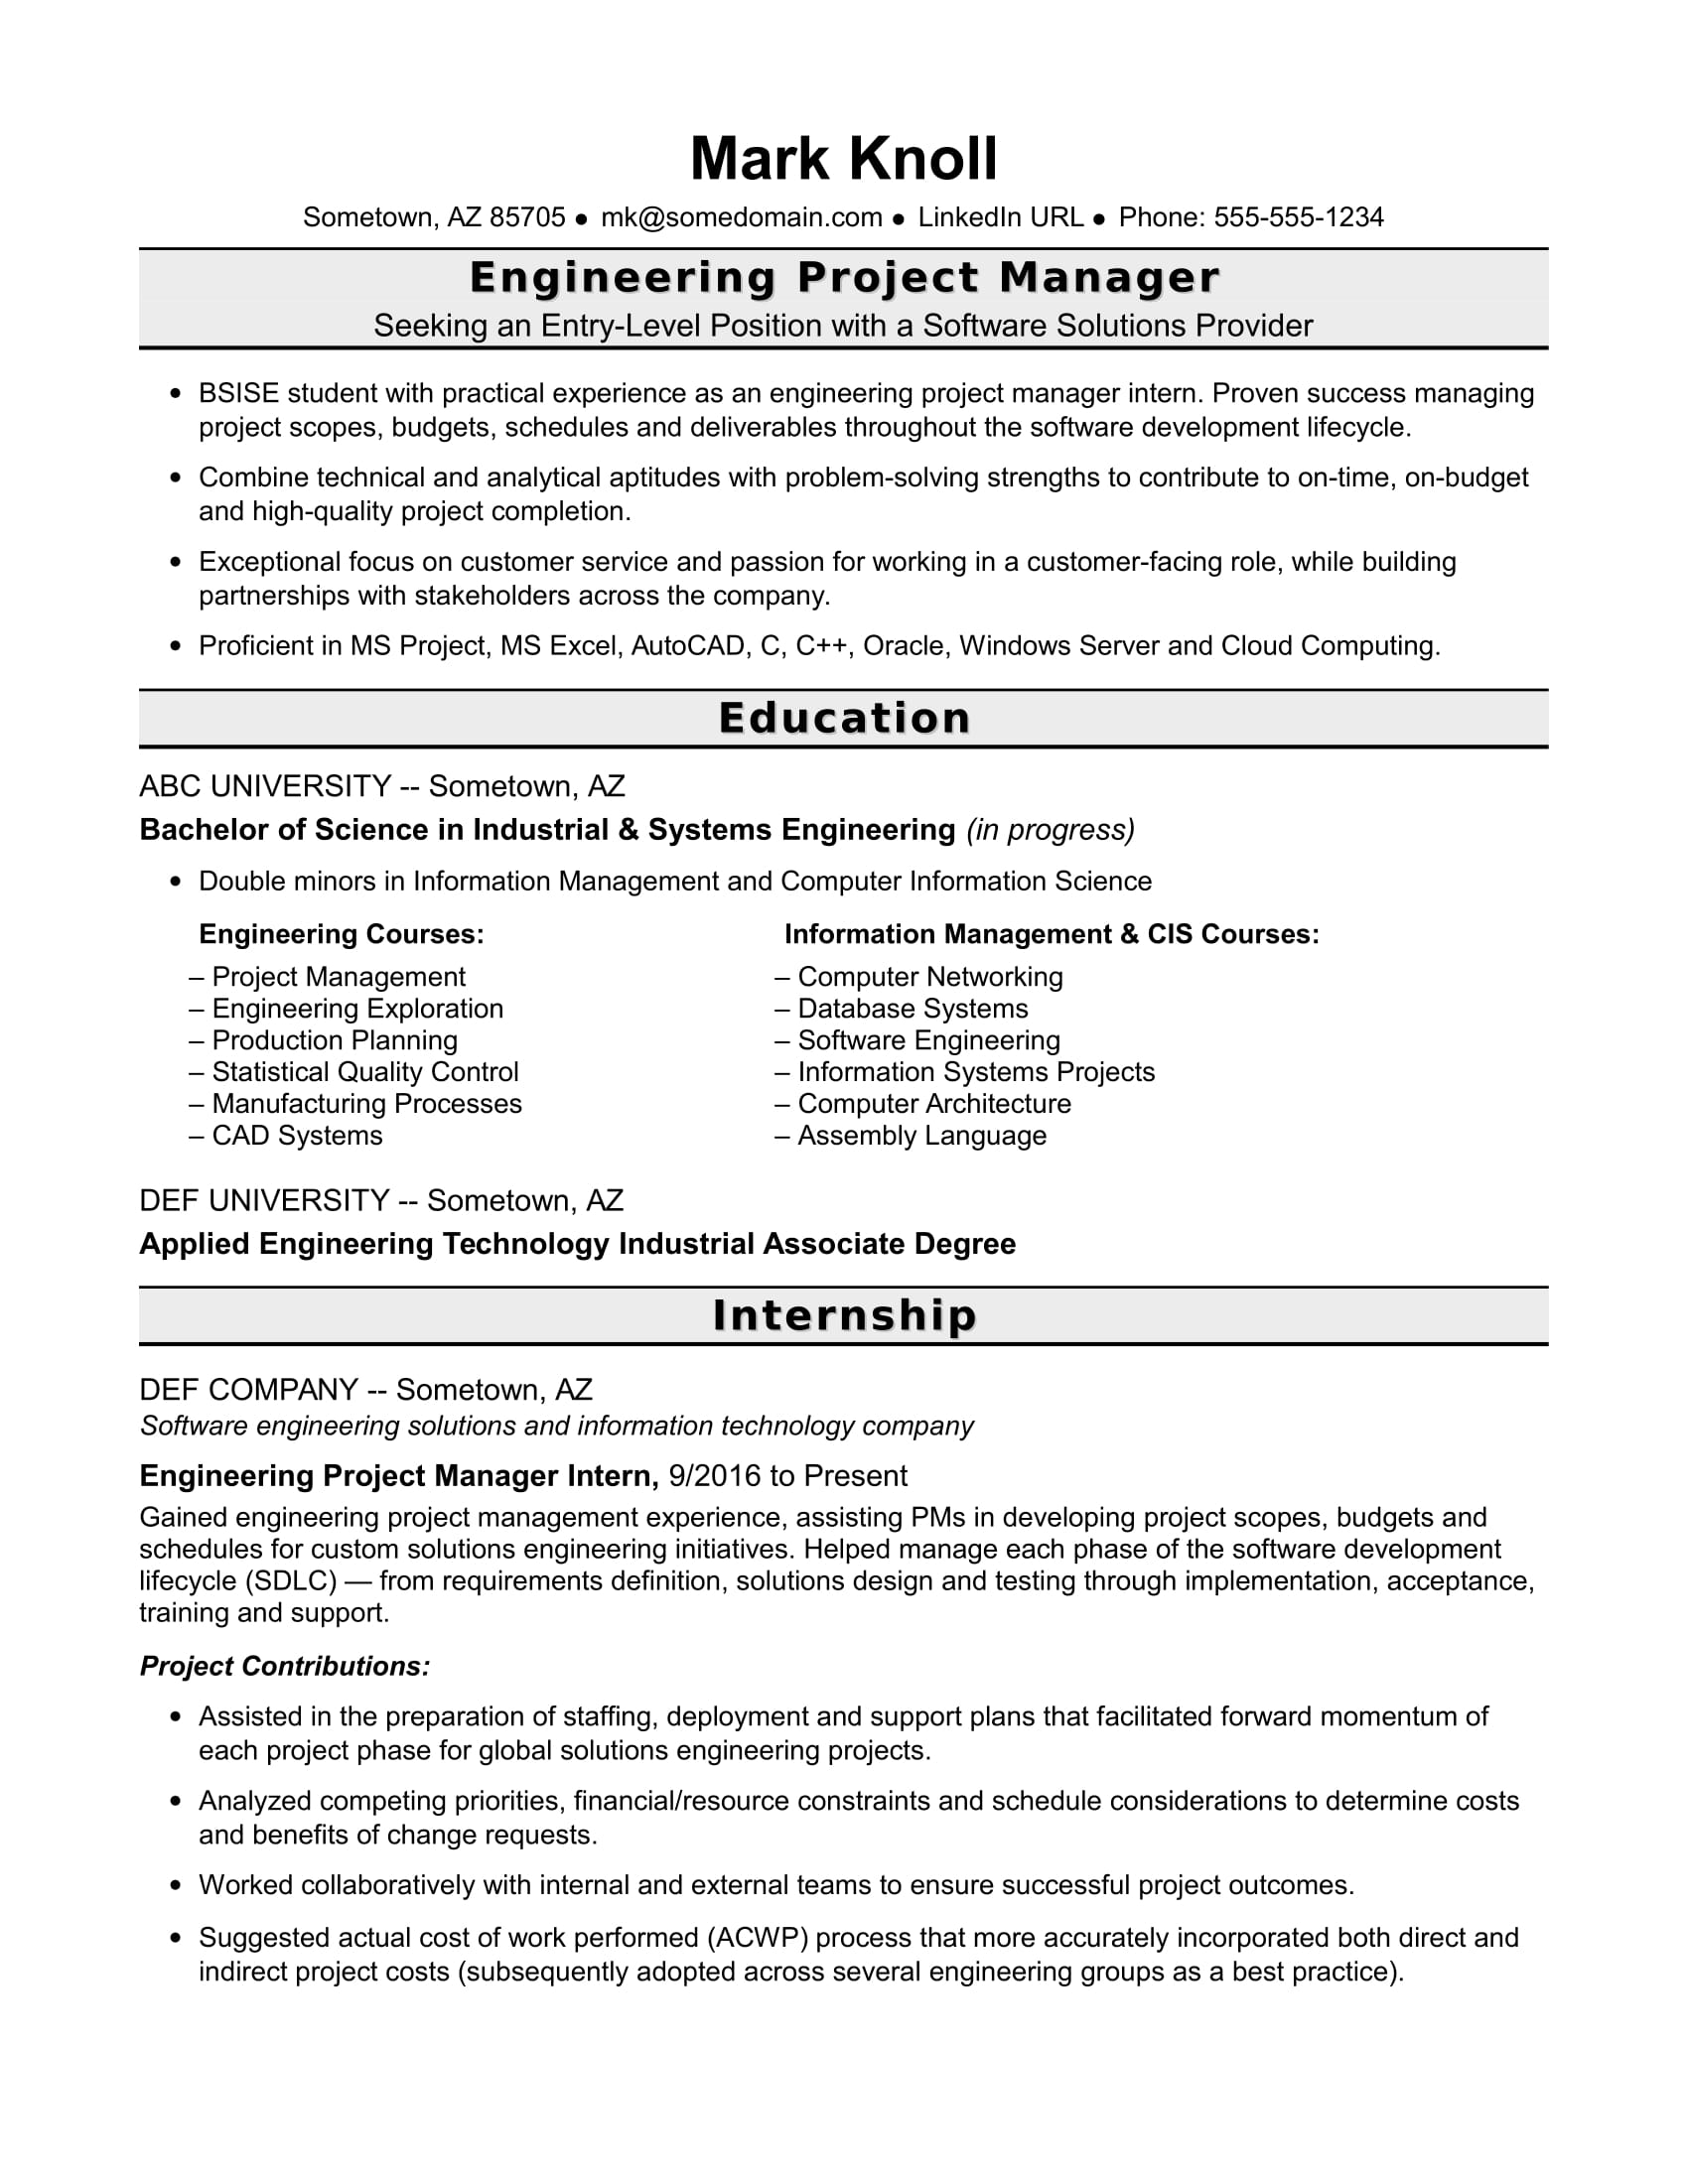 Engineering project management entry level jobs